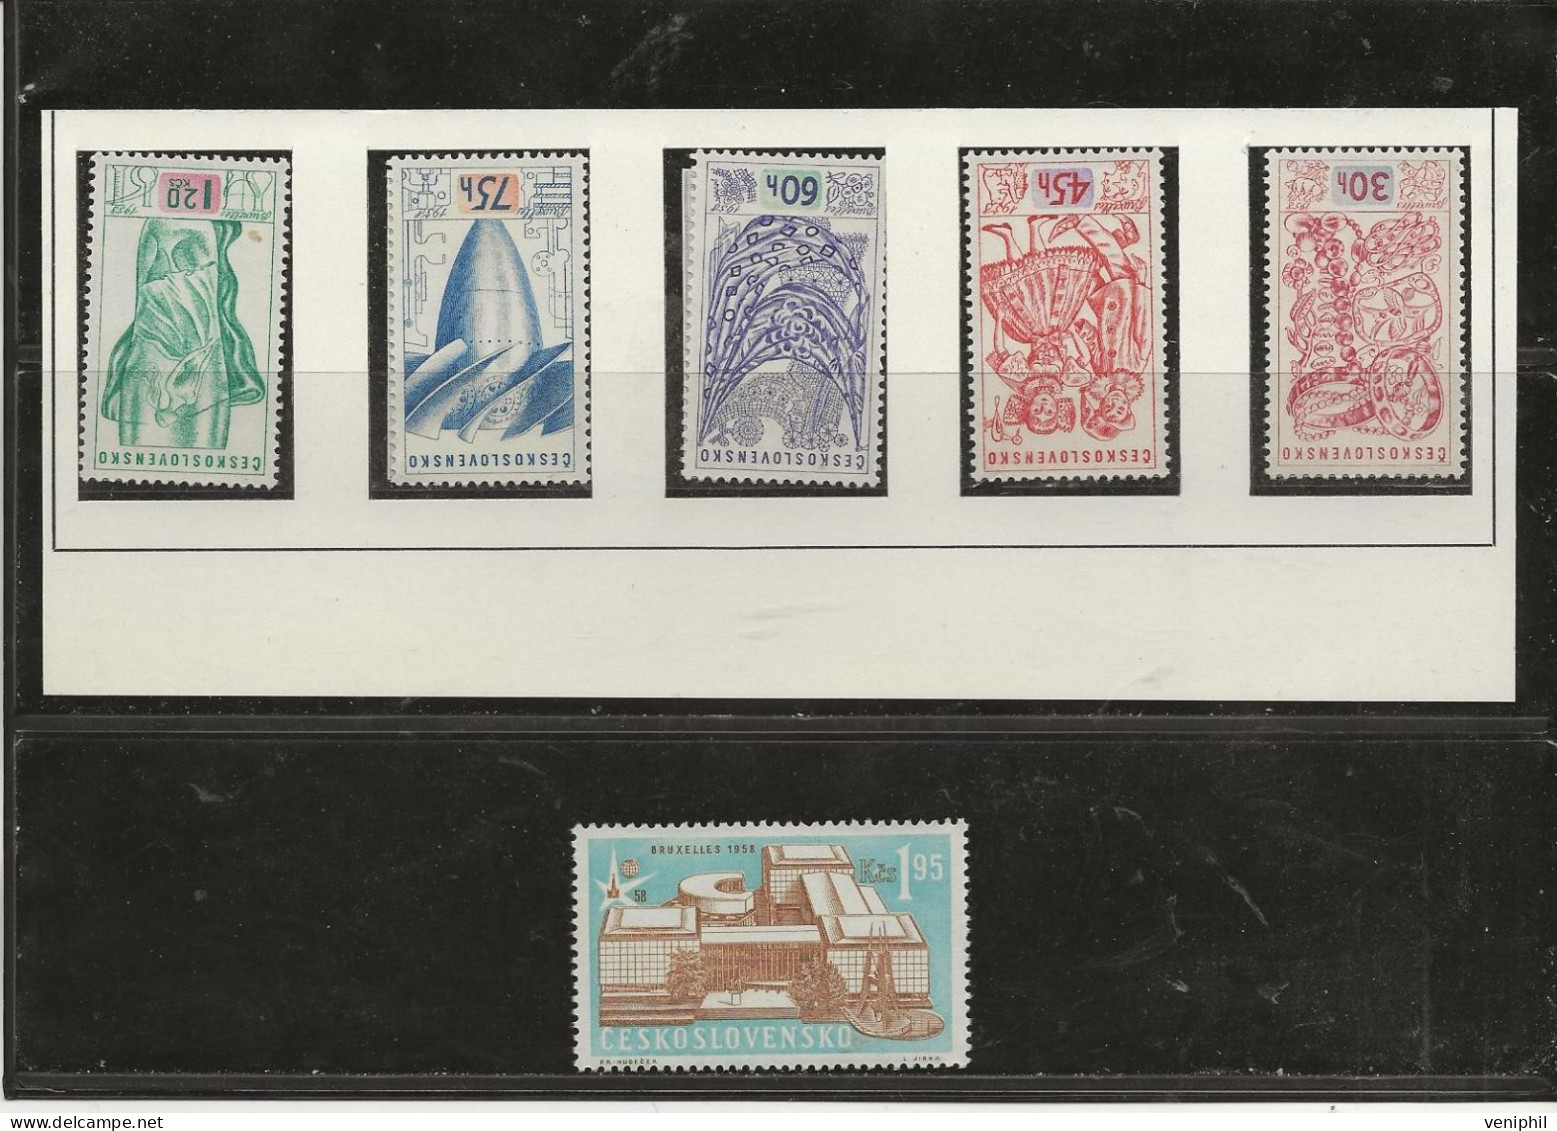 TCHECOSLOVAQUIE  - EXPO DE BRUXELLES -N° 952 A 956 A  NEUF SANS CHARNIERE - ANNEE 1958 - - Unused Stamps